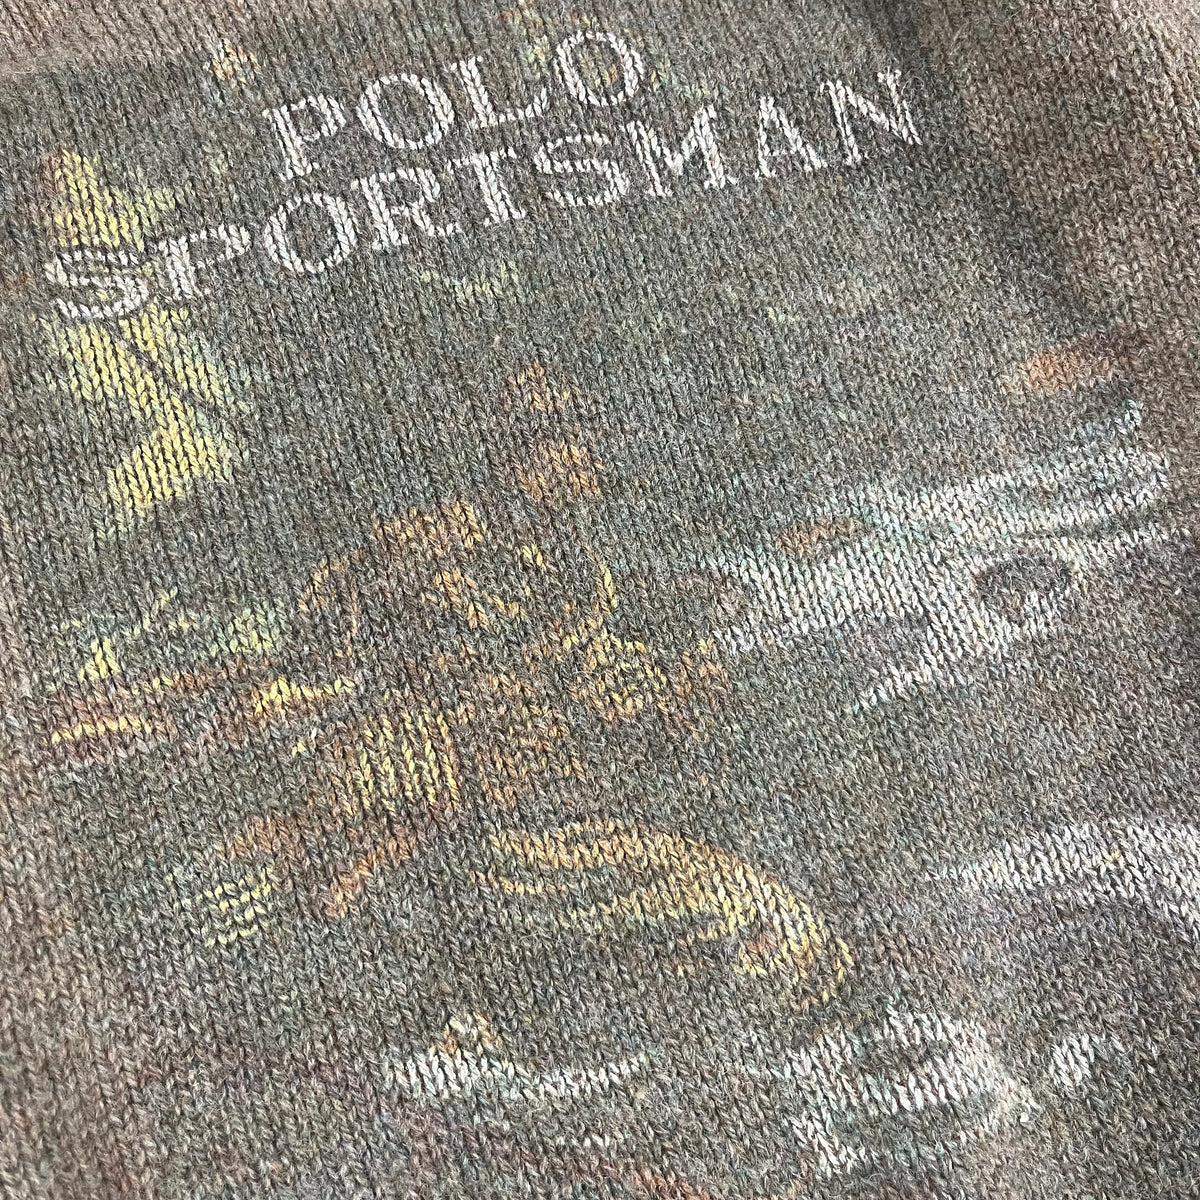 Vintage Polo Ralph Lauren Country &quot;Polo Sportsman&quot; Wool Knit Sweater